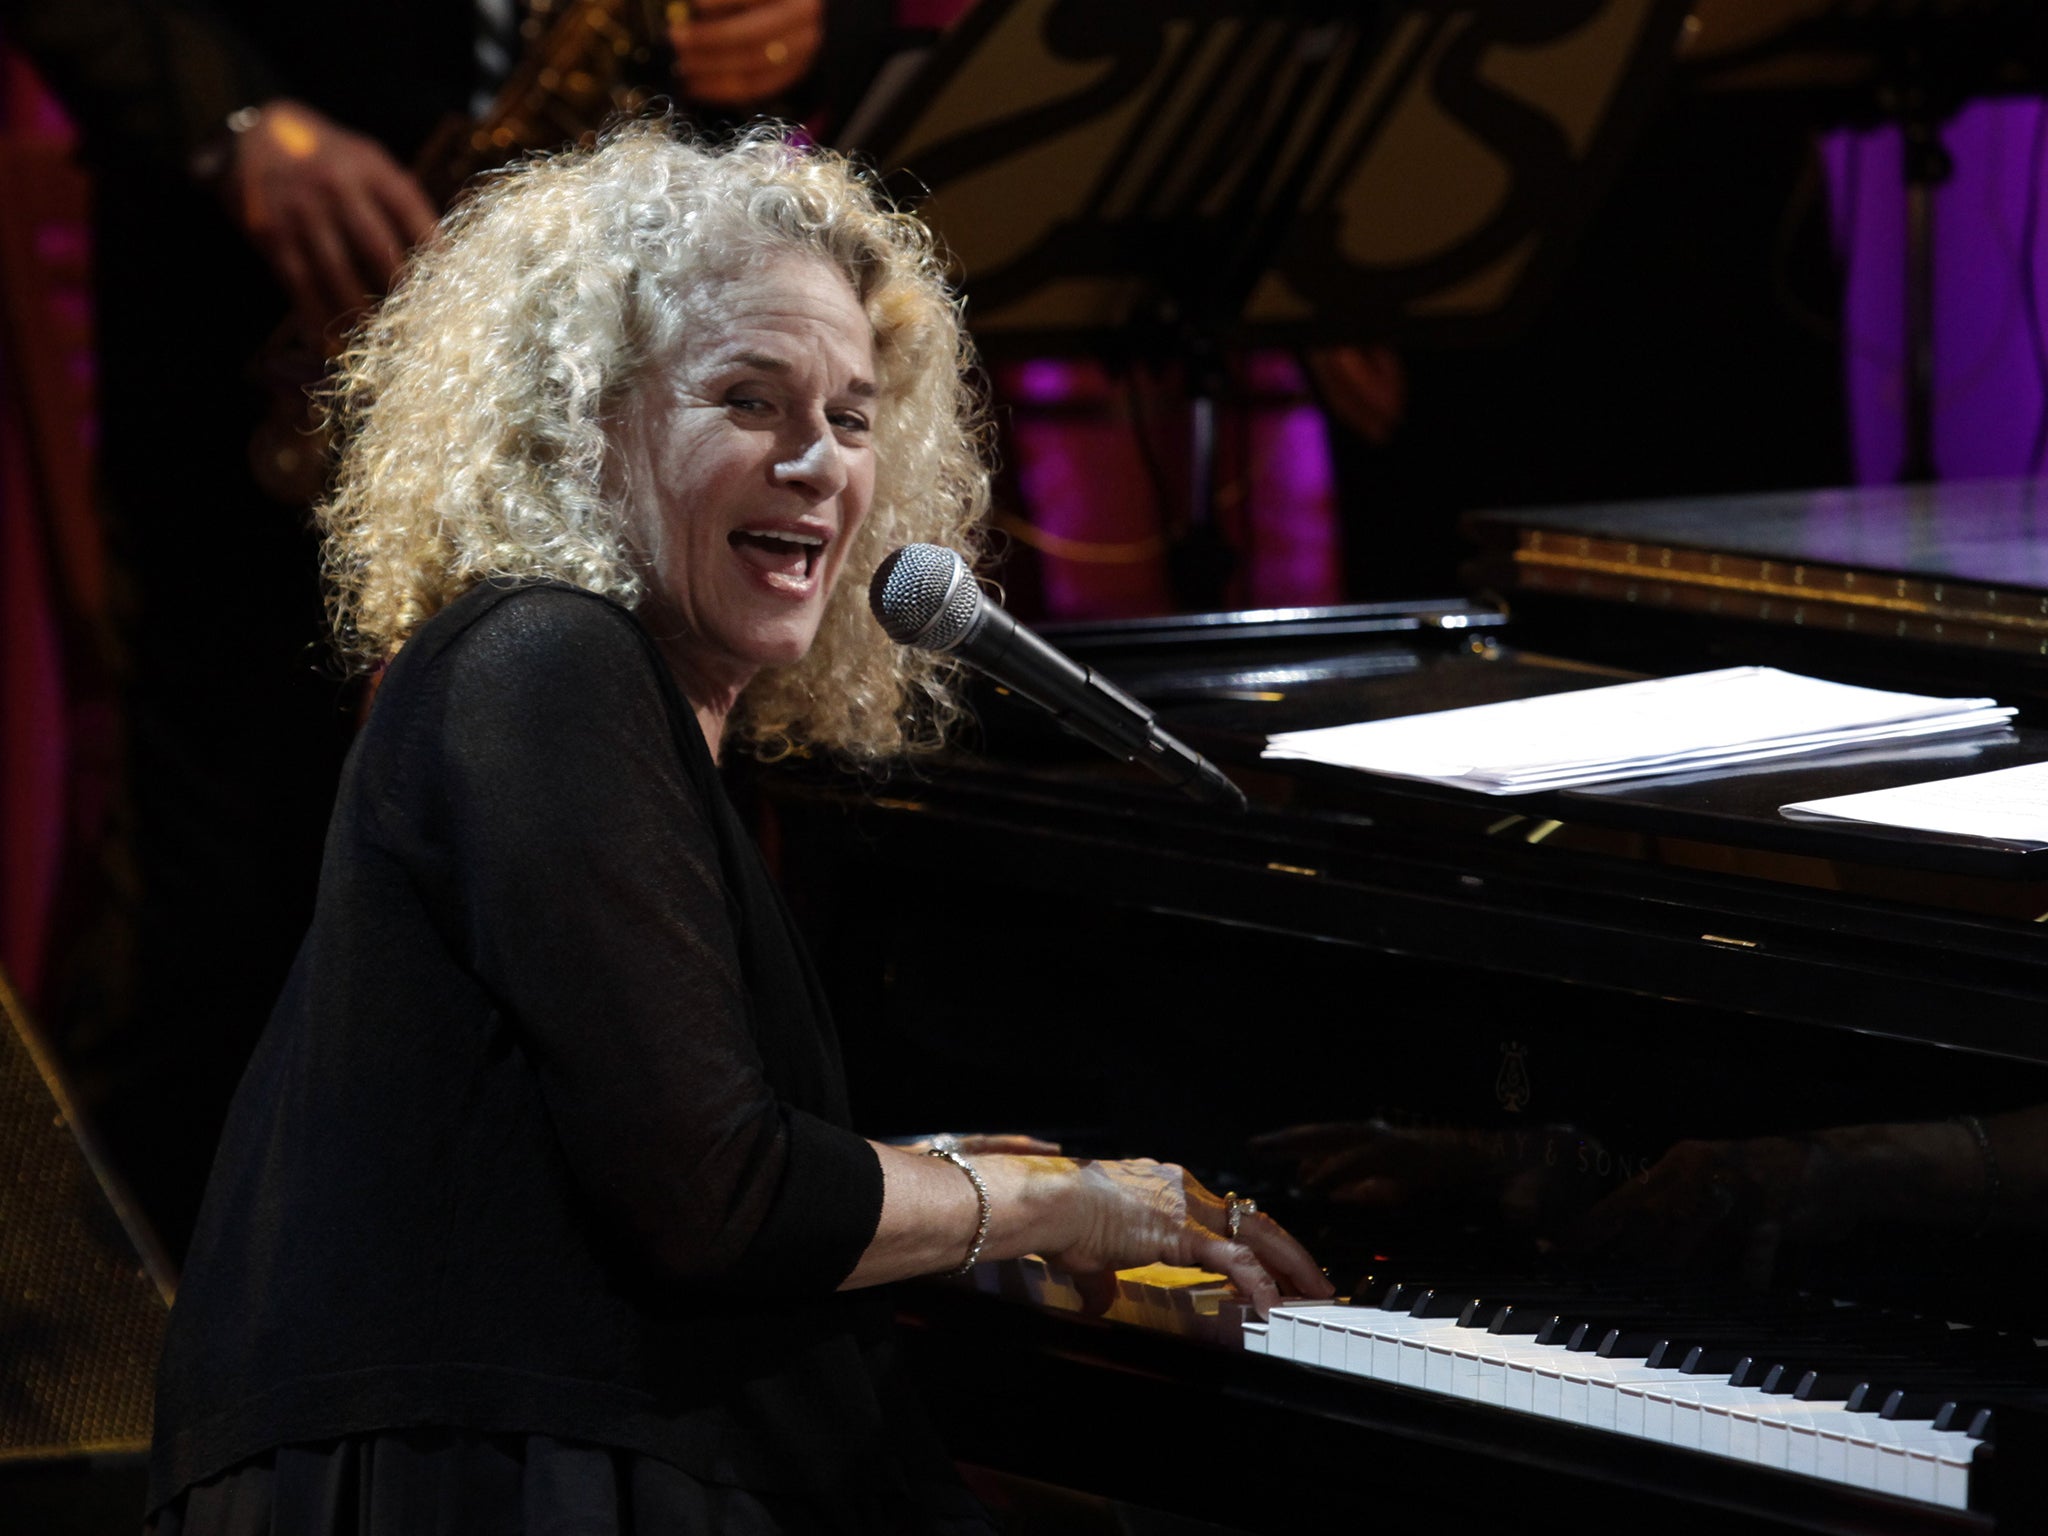 Carole King is one of Frances's biggest inspirations